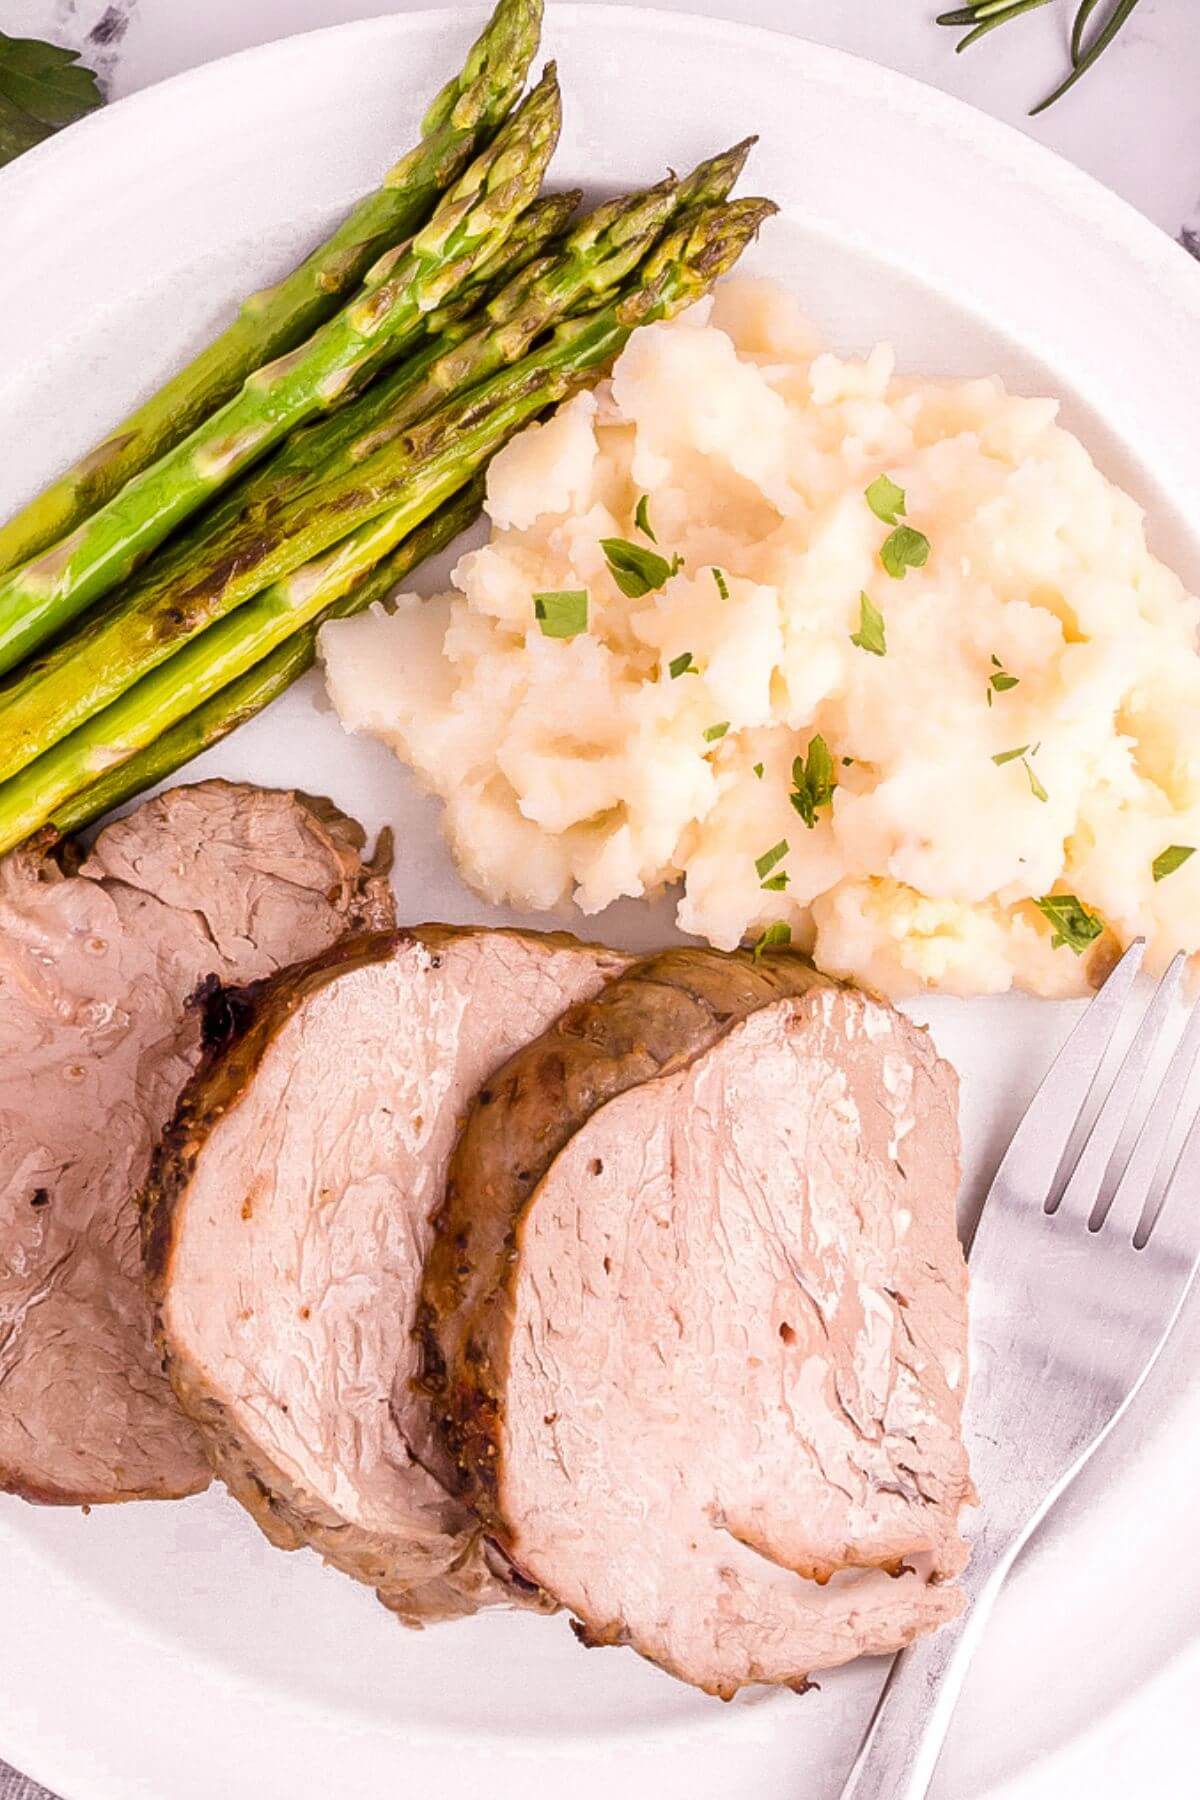 Slices of juicy tenderloin are shown next to mashed potatoes and asparagus.